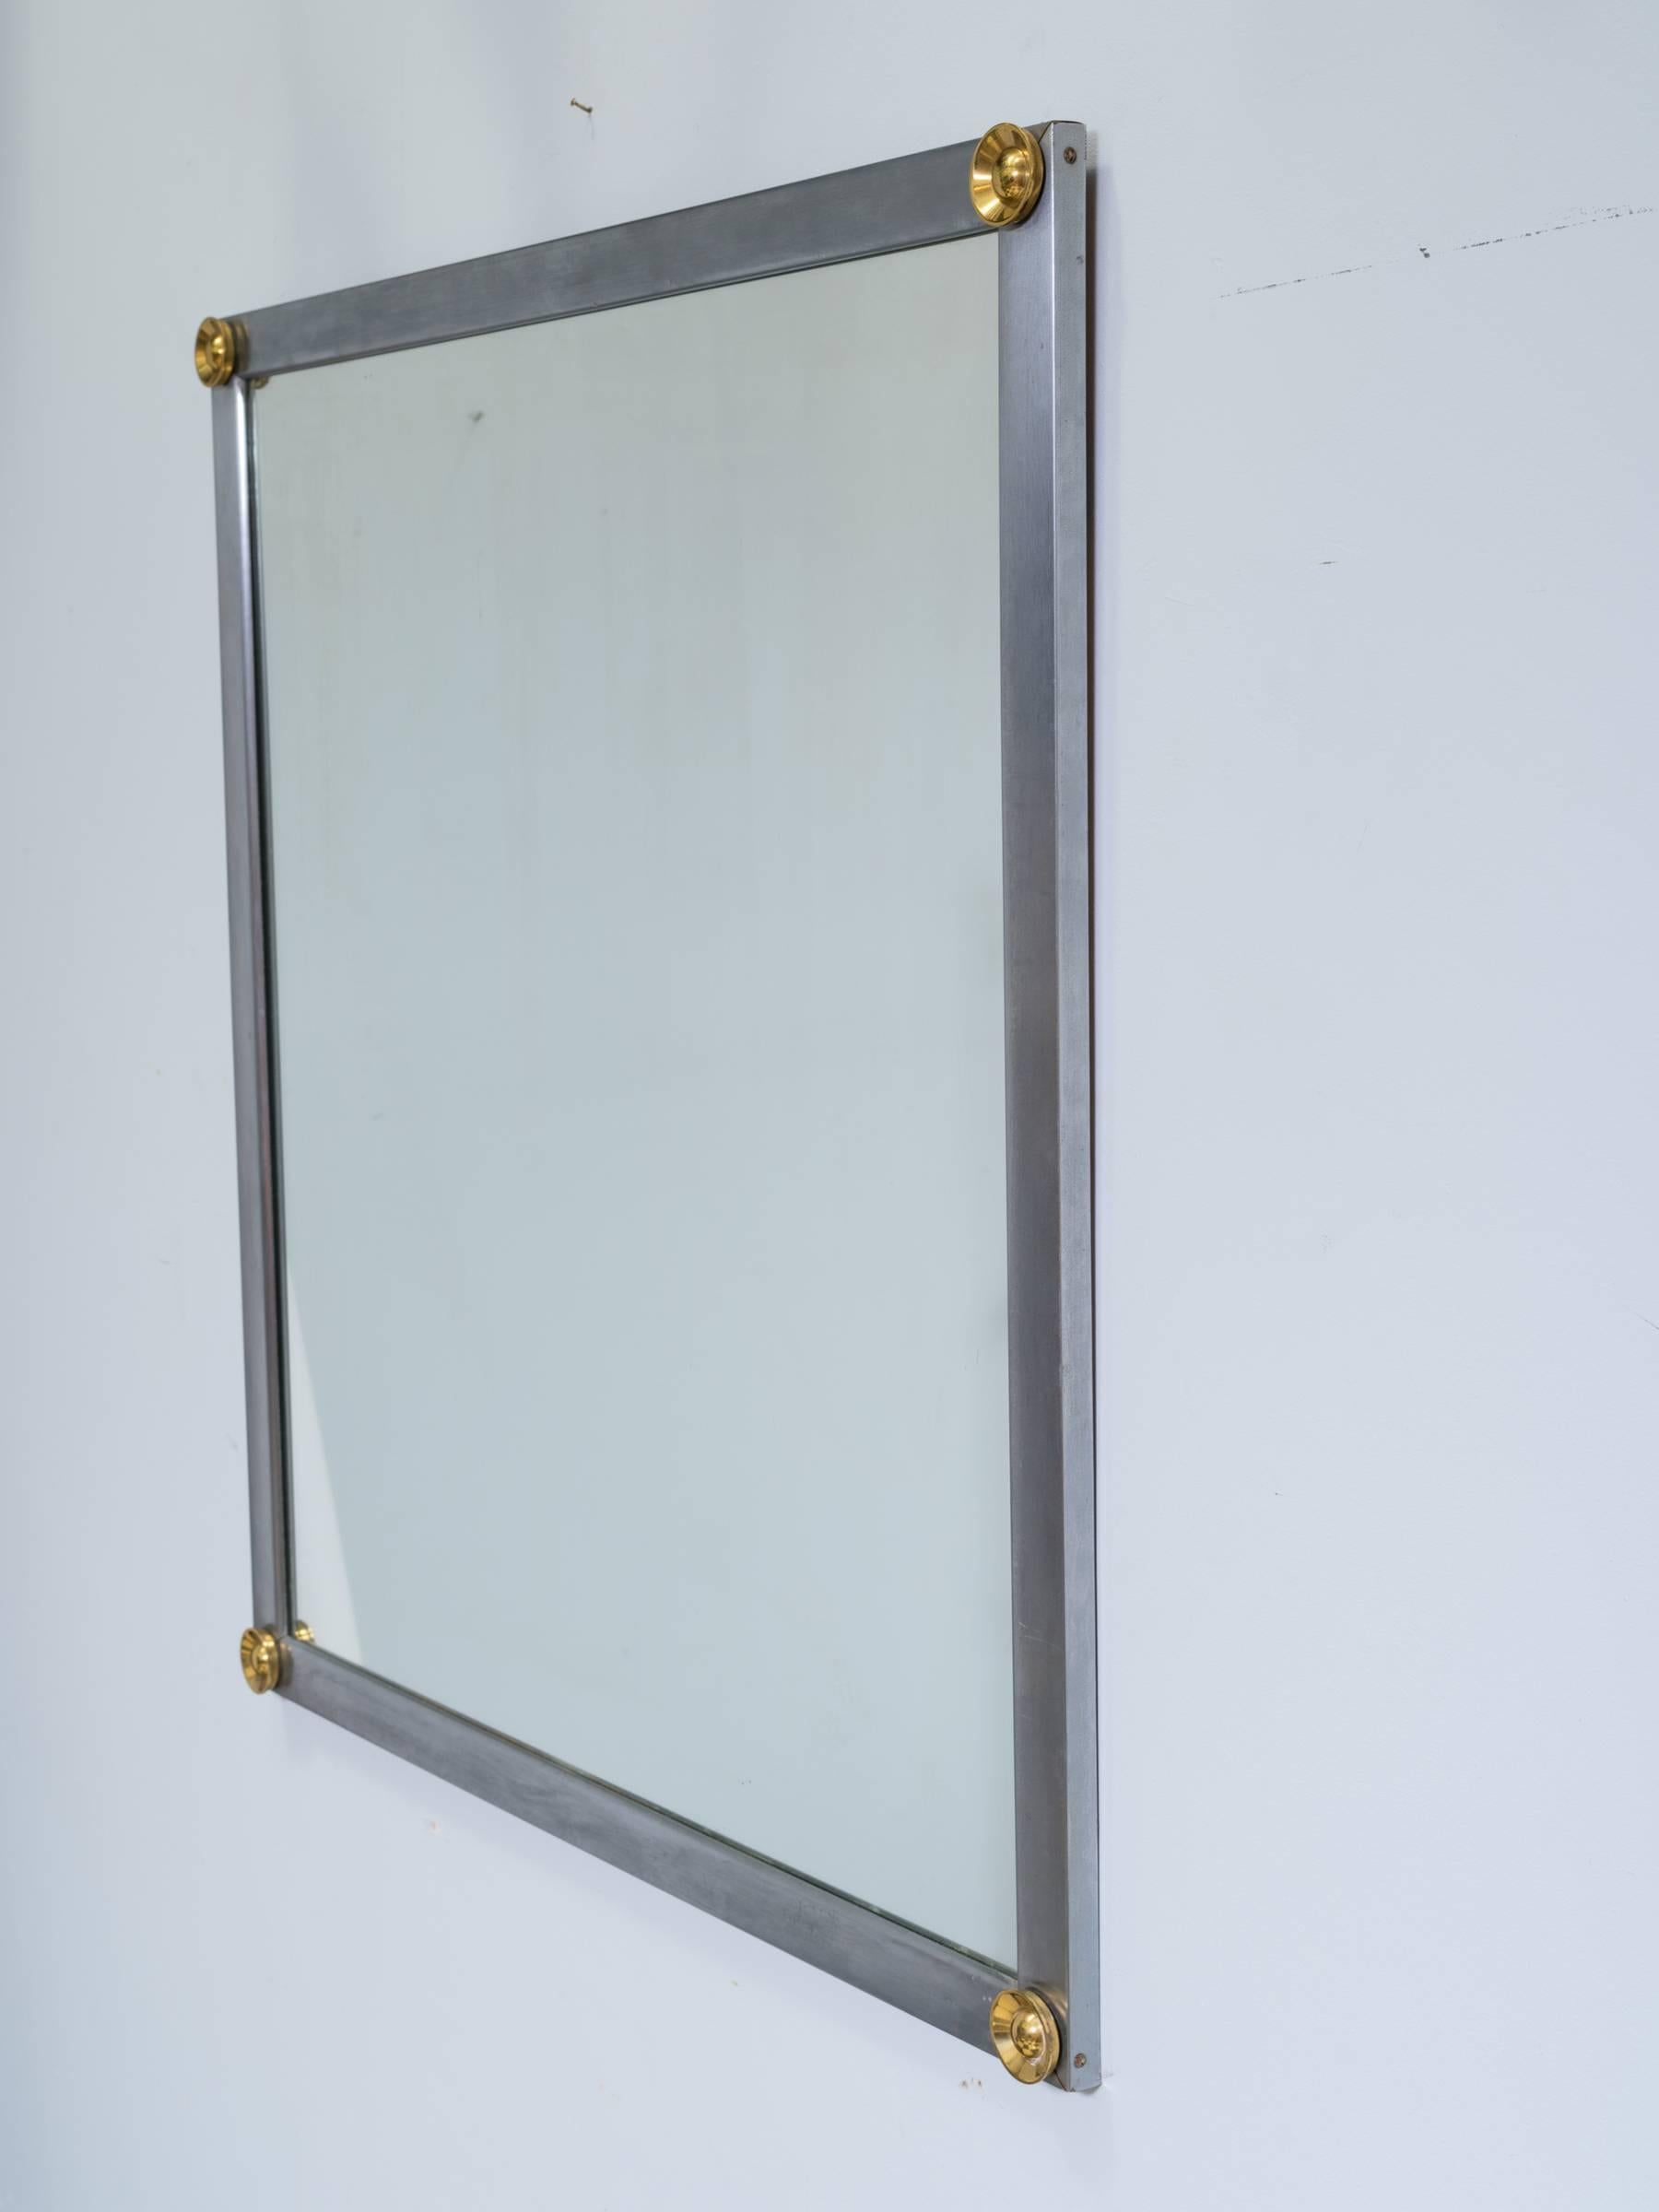 Steel with brass accents mirror.